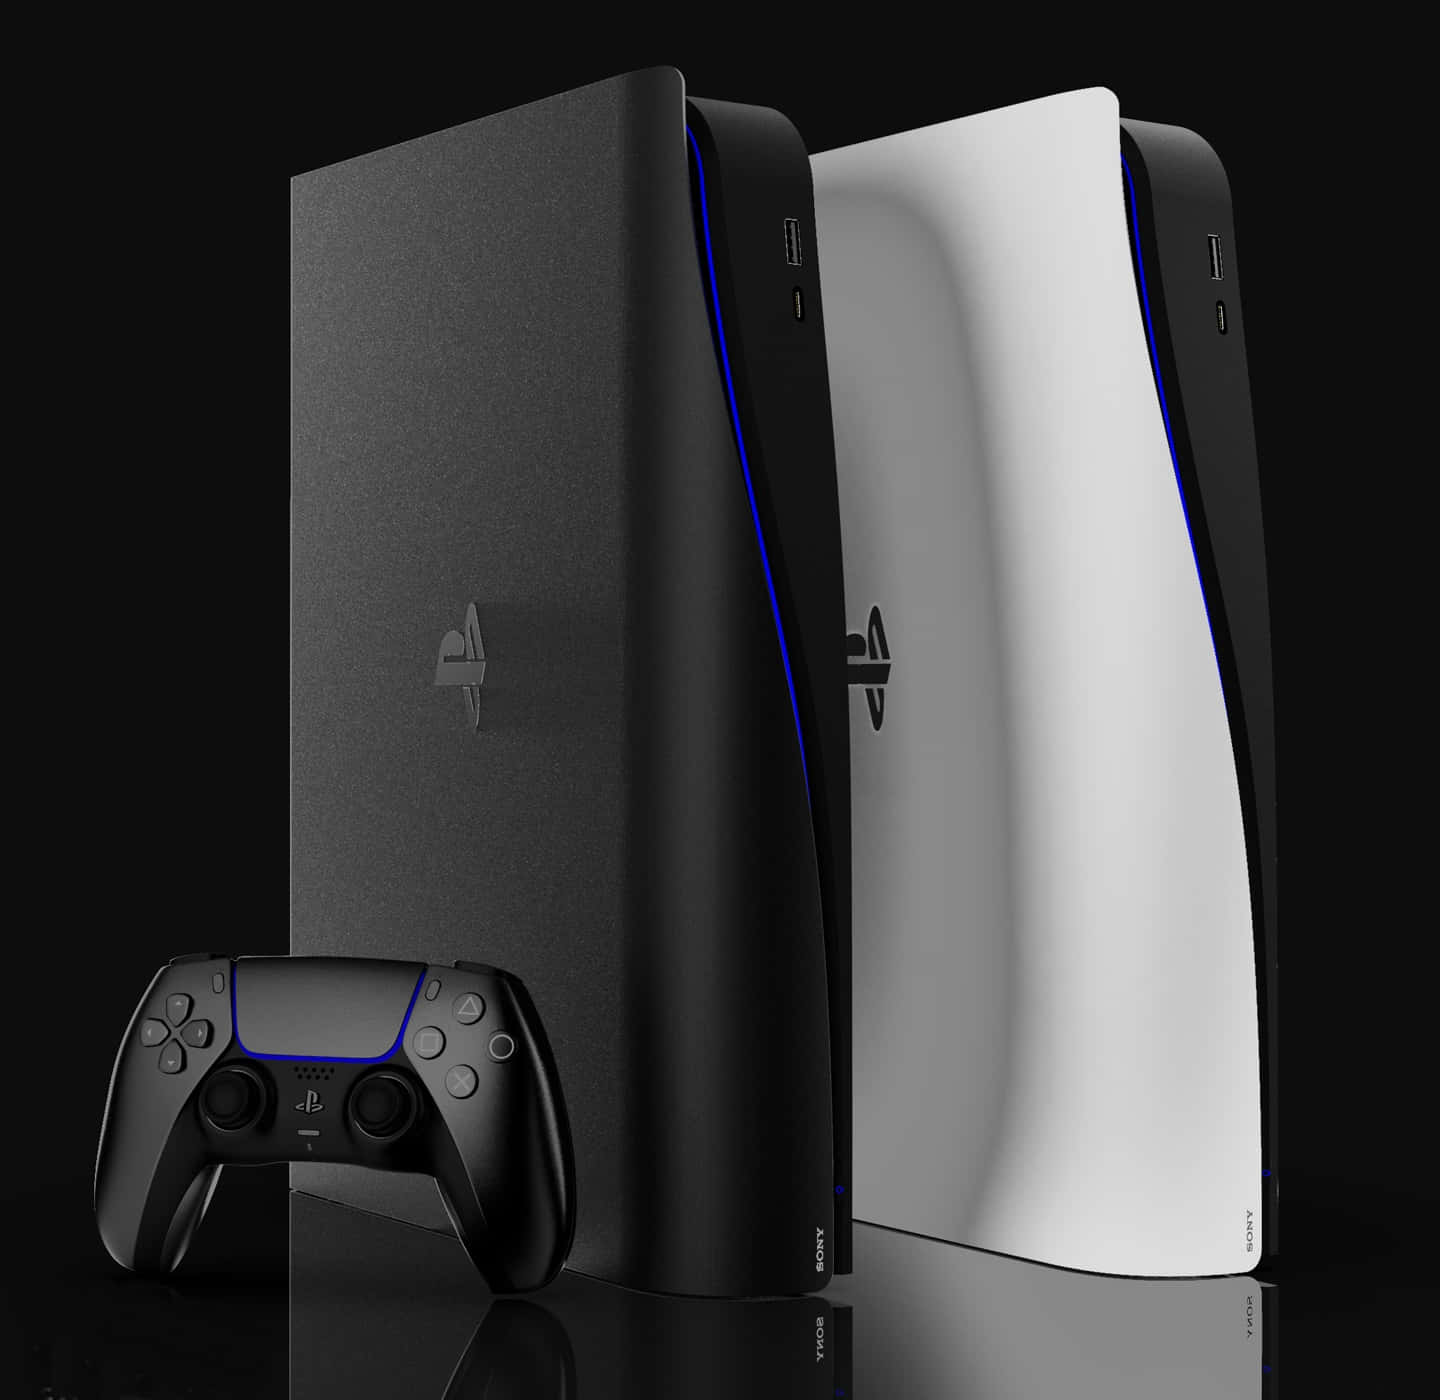 Enjoy the revolutionary gaming experience with the incredible PlayStation 5